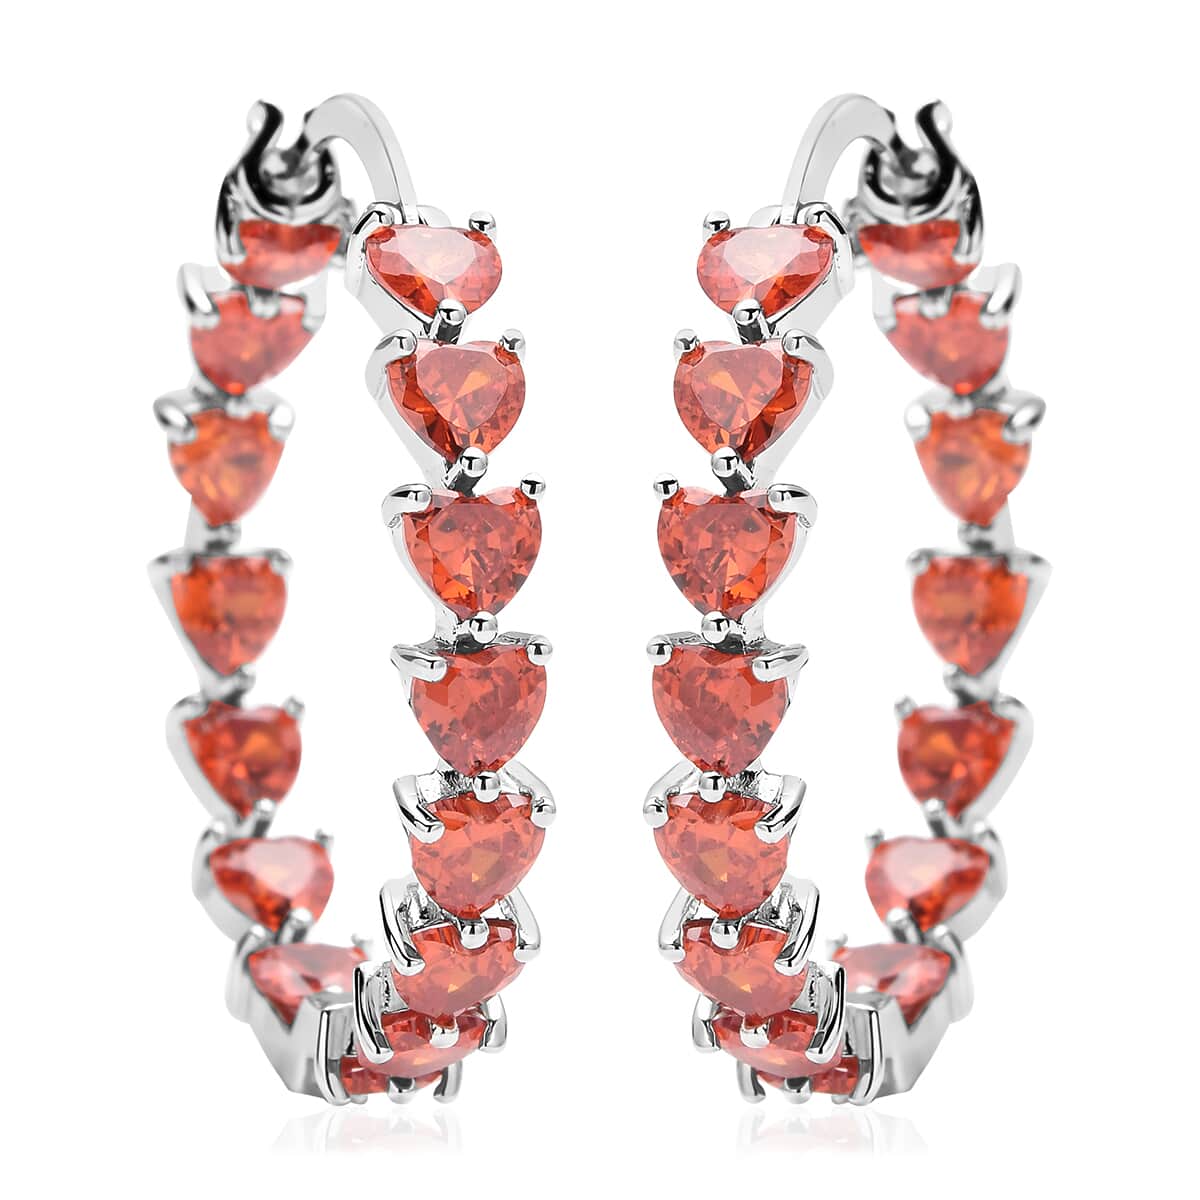 Simulated Orange Diamond Earrings in Silvertone, Inside Out Hoops, Simulated Diamond Jewelry For Women image number 0